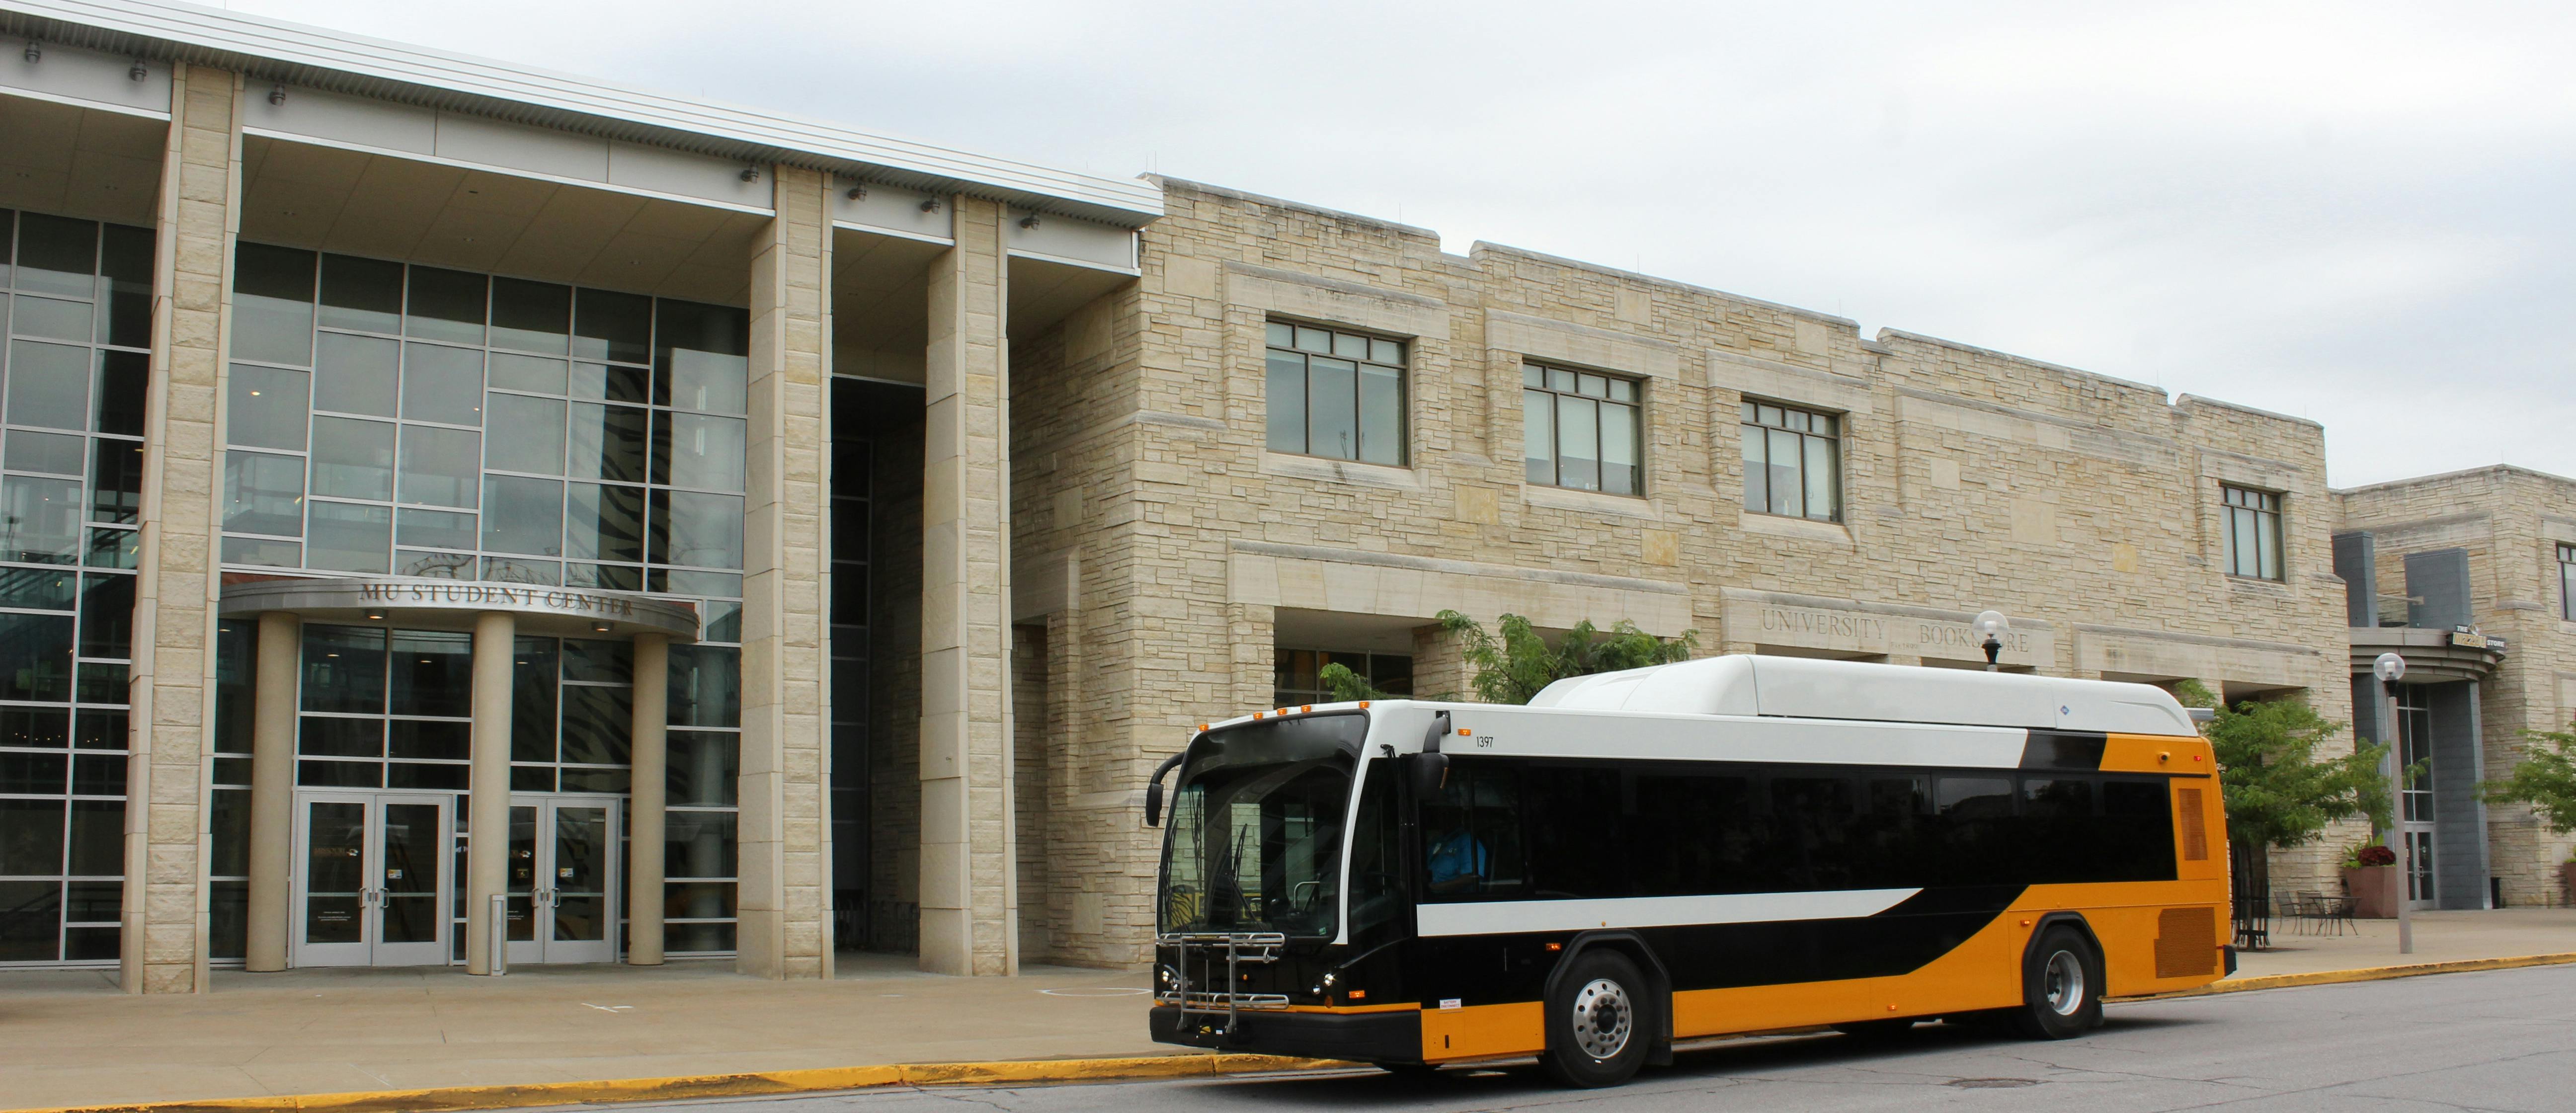 Bus in front of MU campus student bookstore.jpg